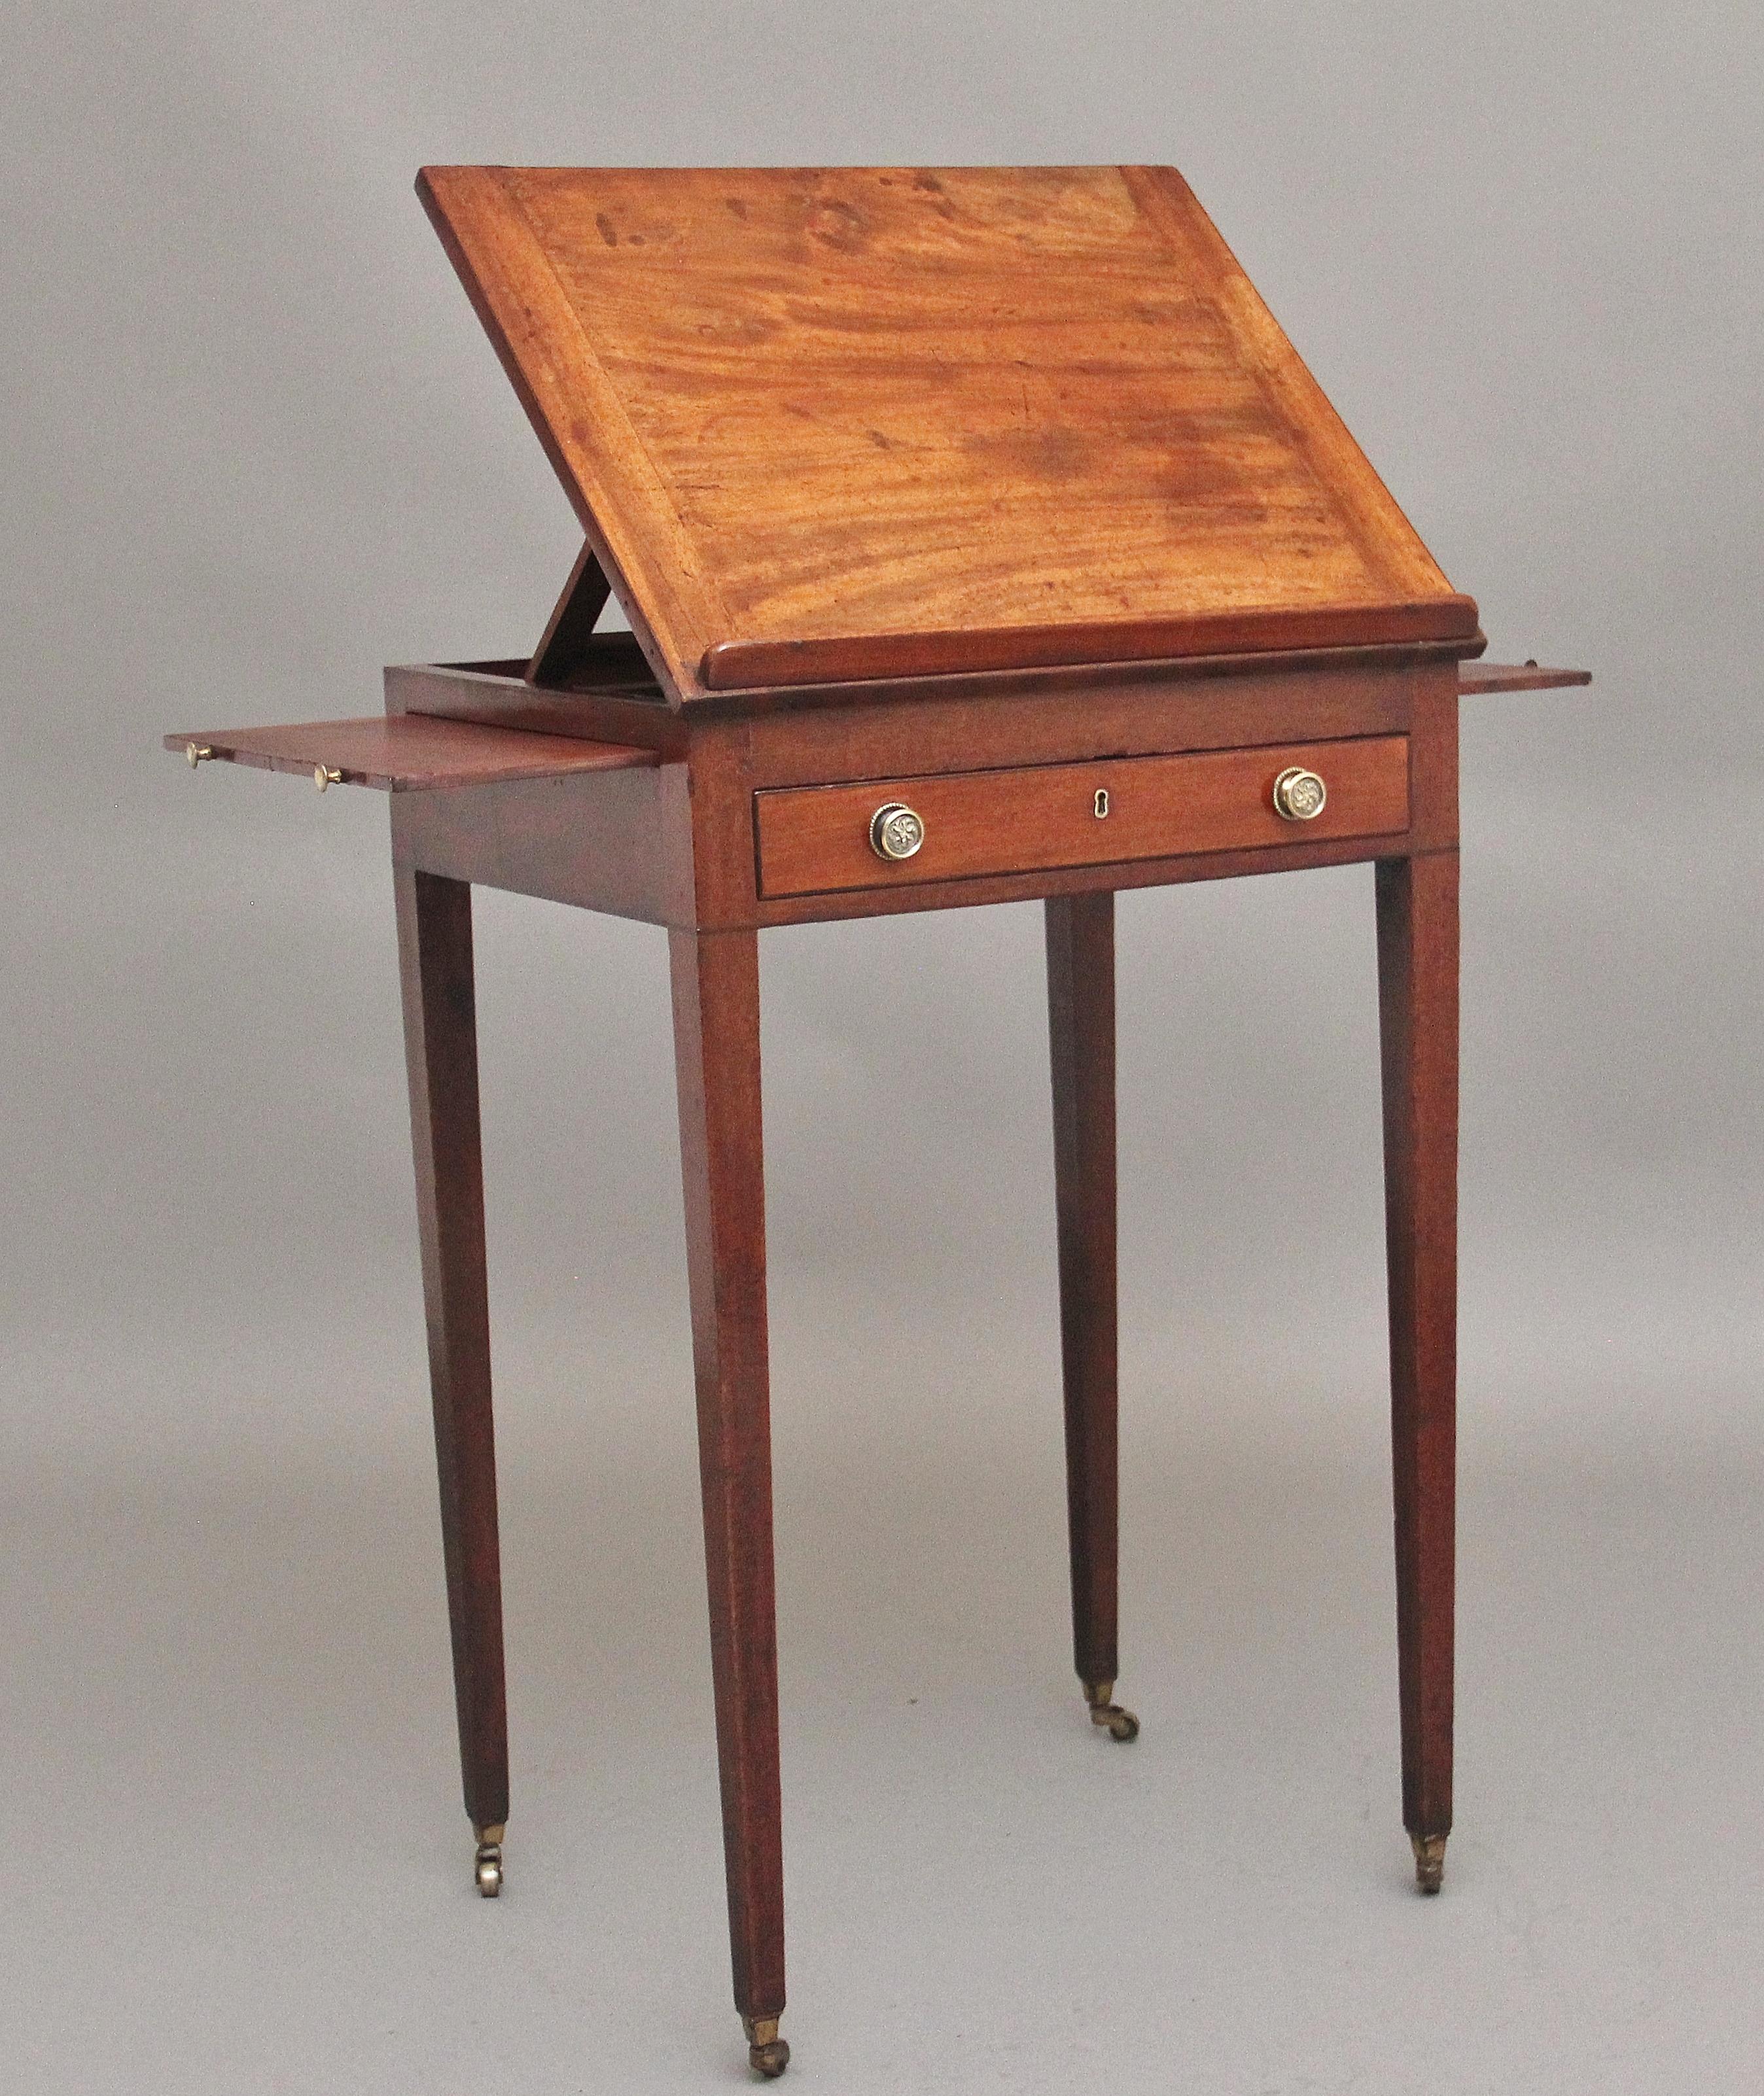 Early 19th Century mahogany reading / side table, having a lift up adjustable reading slope, pull out candle slides to each side, the front of the table is a single drawer with a fitted interior, having the original brass turned and engraved